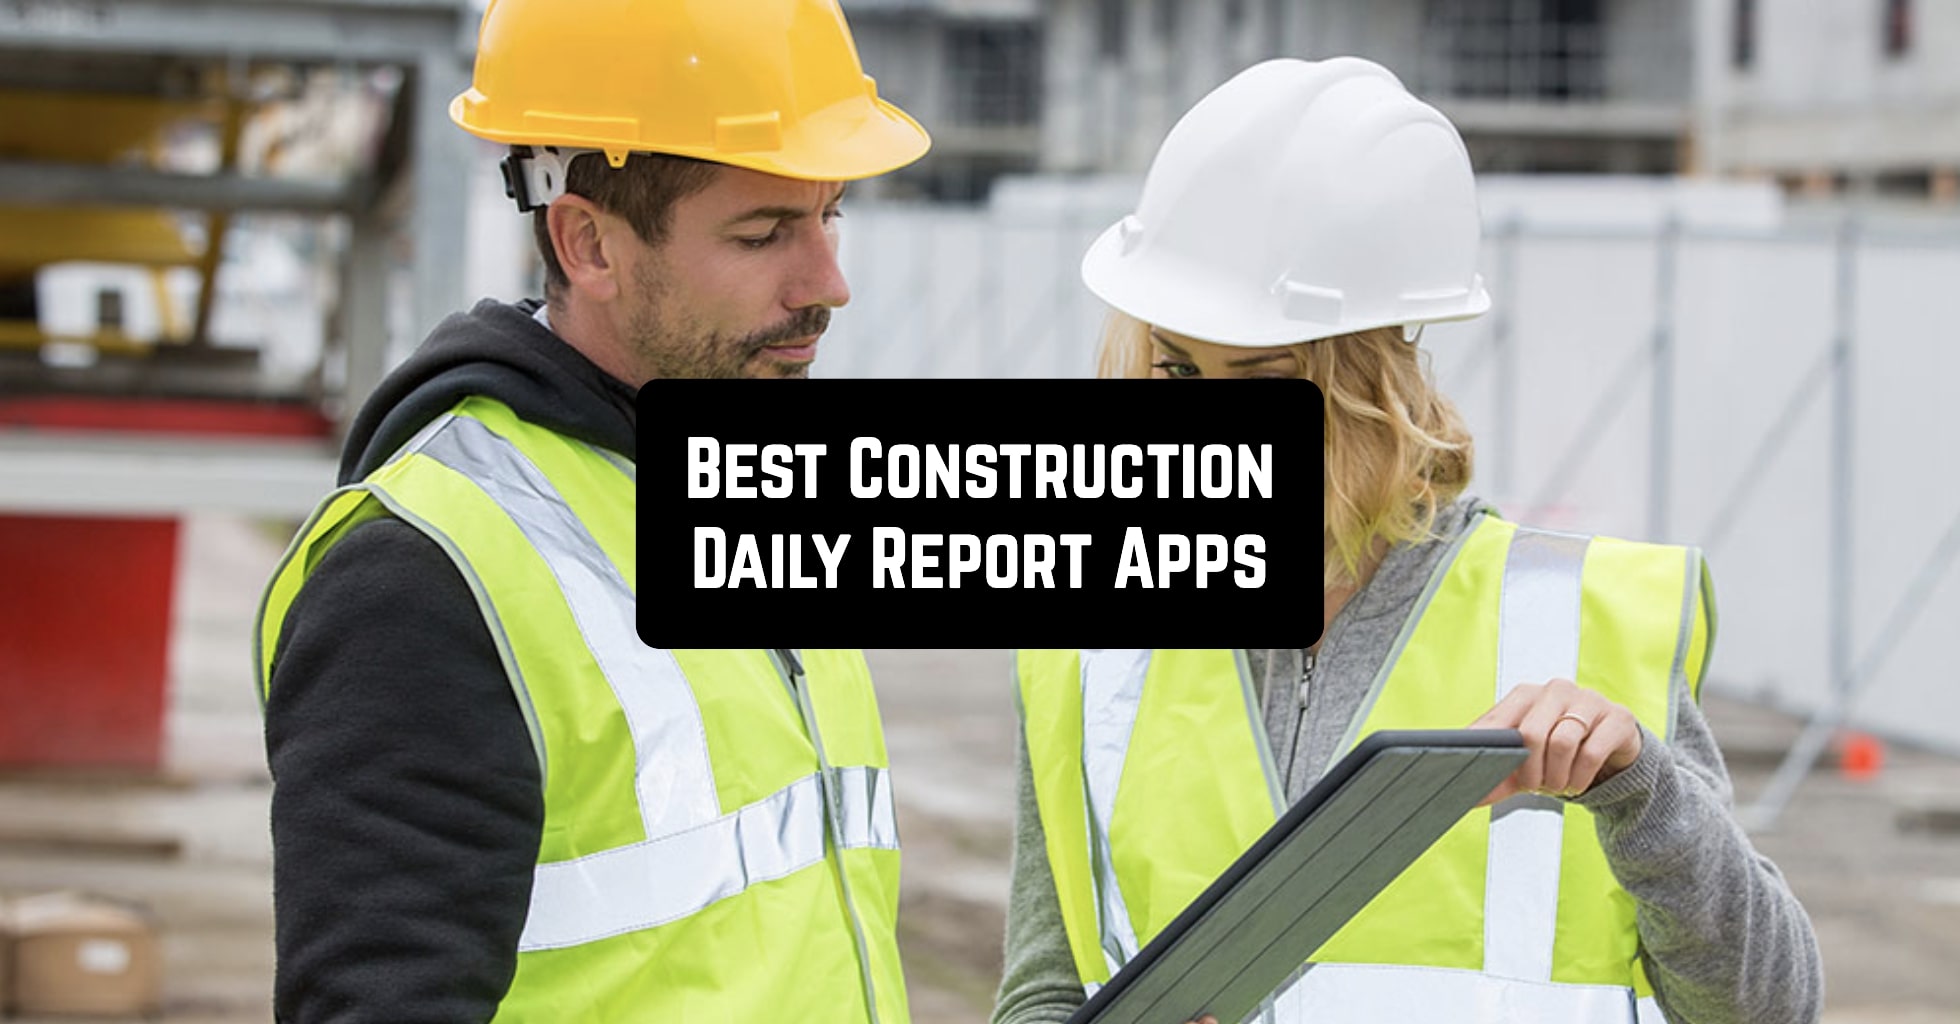 Best Construction Daily Report Apps